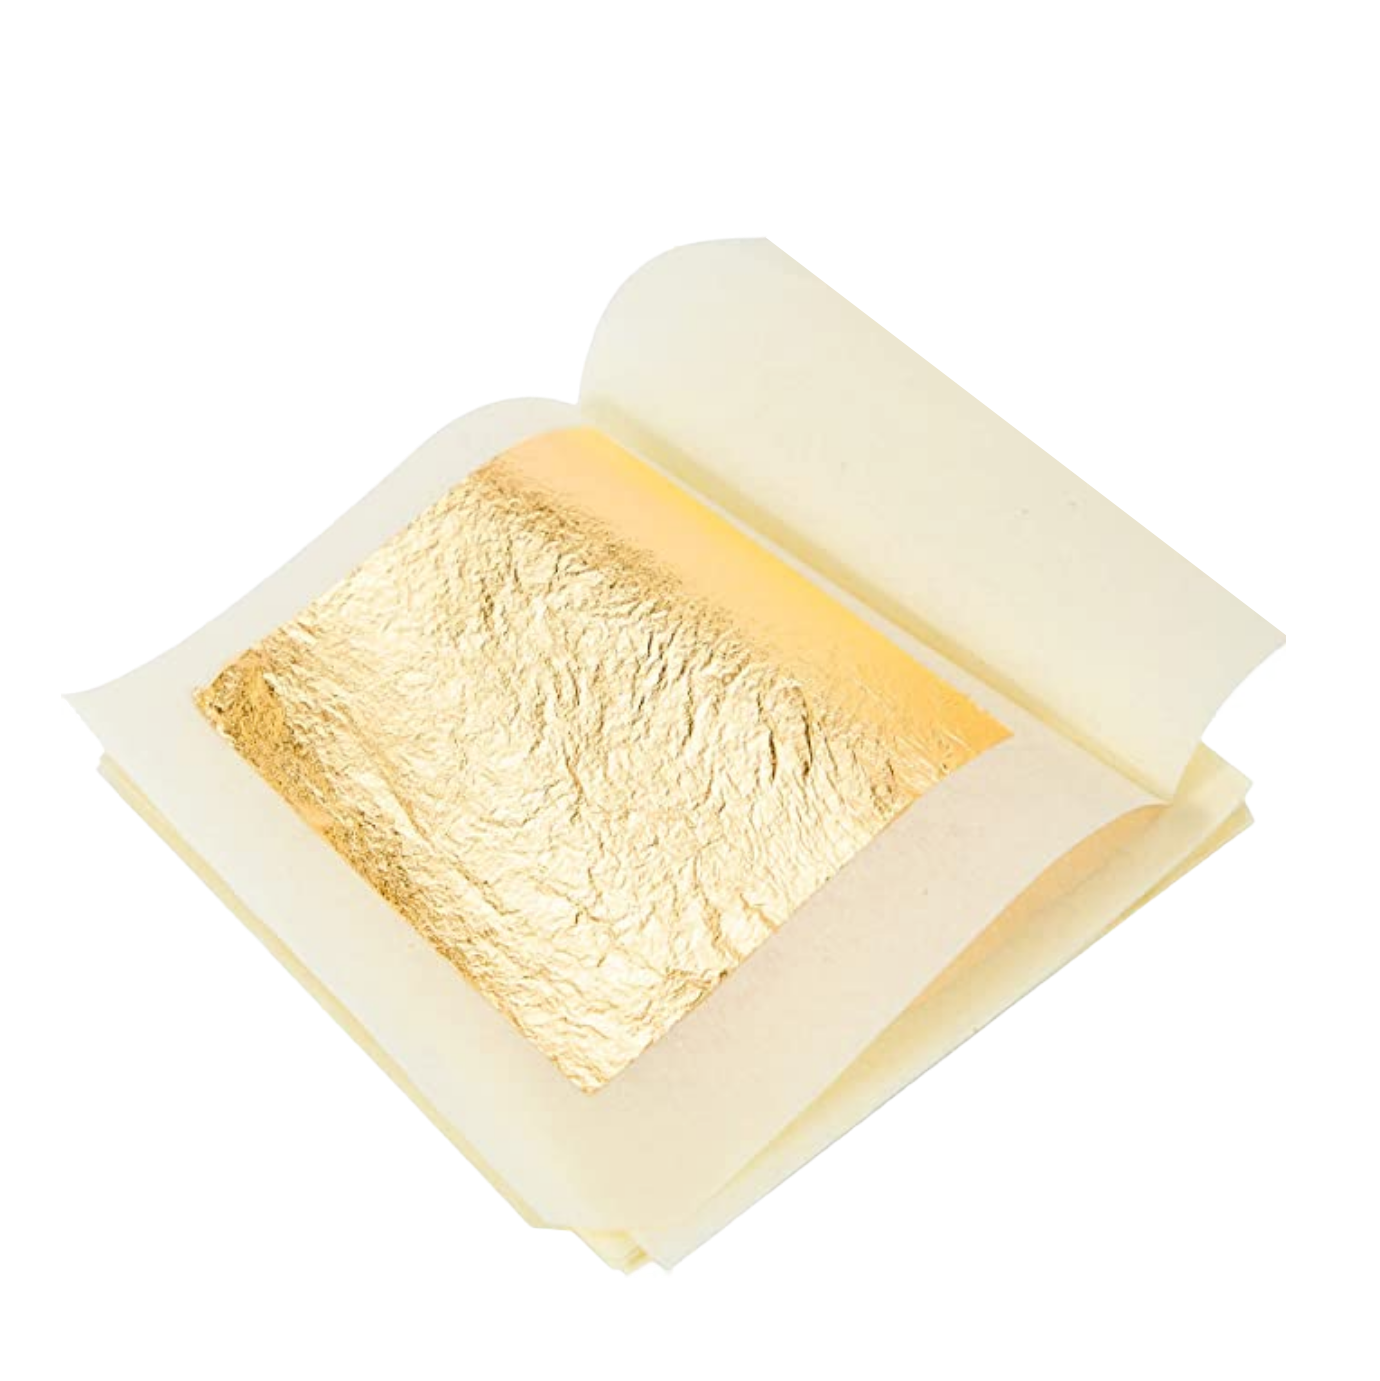 SIM GOLD LEAF Feuilles d'or 18 mm X 18 mm Comestible Alimentaire 24 carats  - Feuille d'or